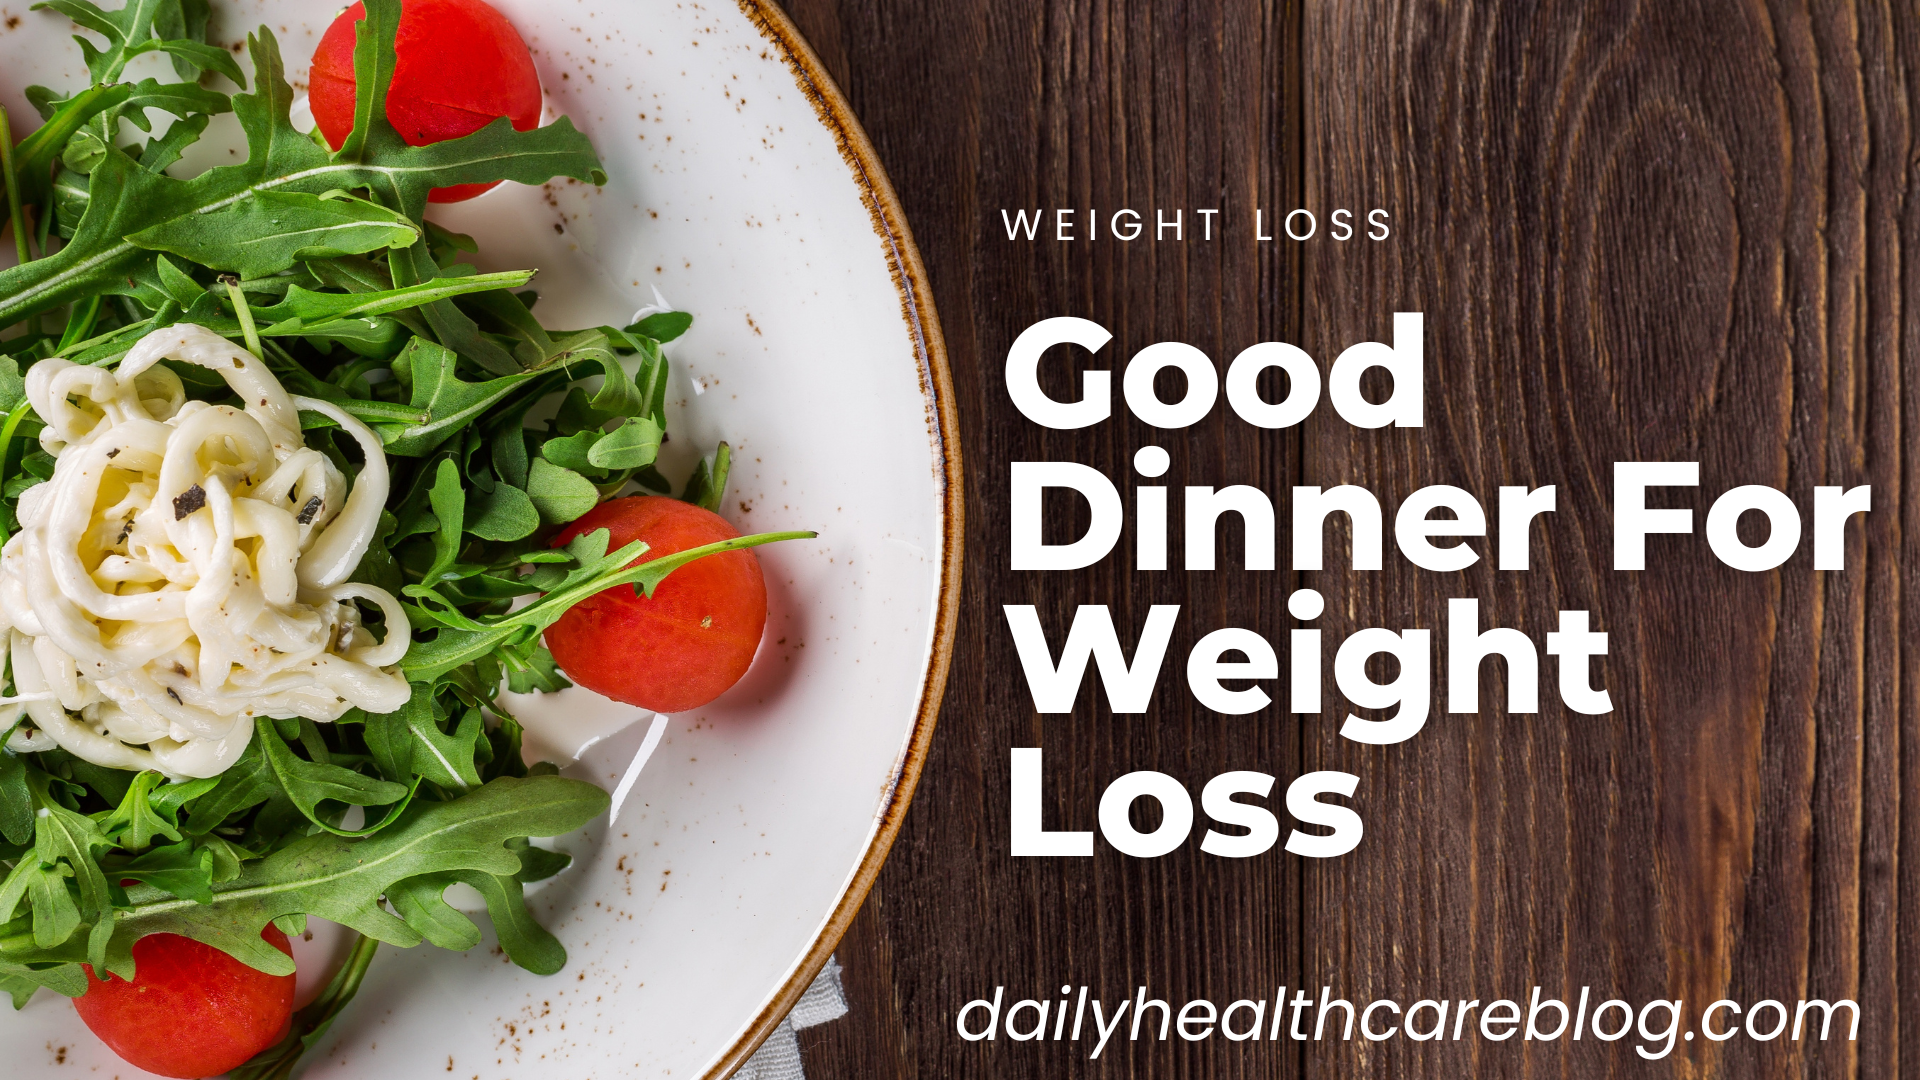 Good Dinner For Weight Loss